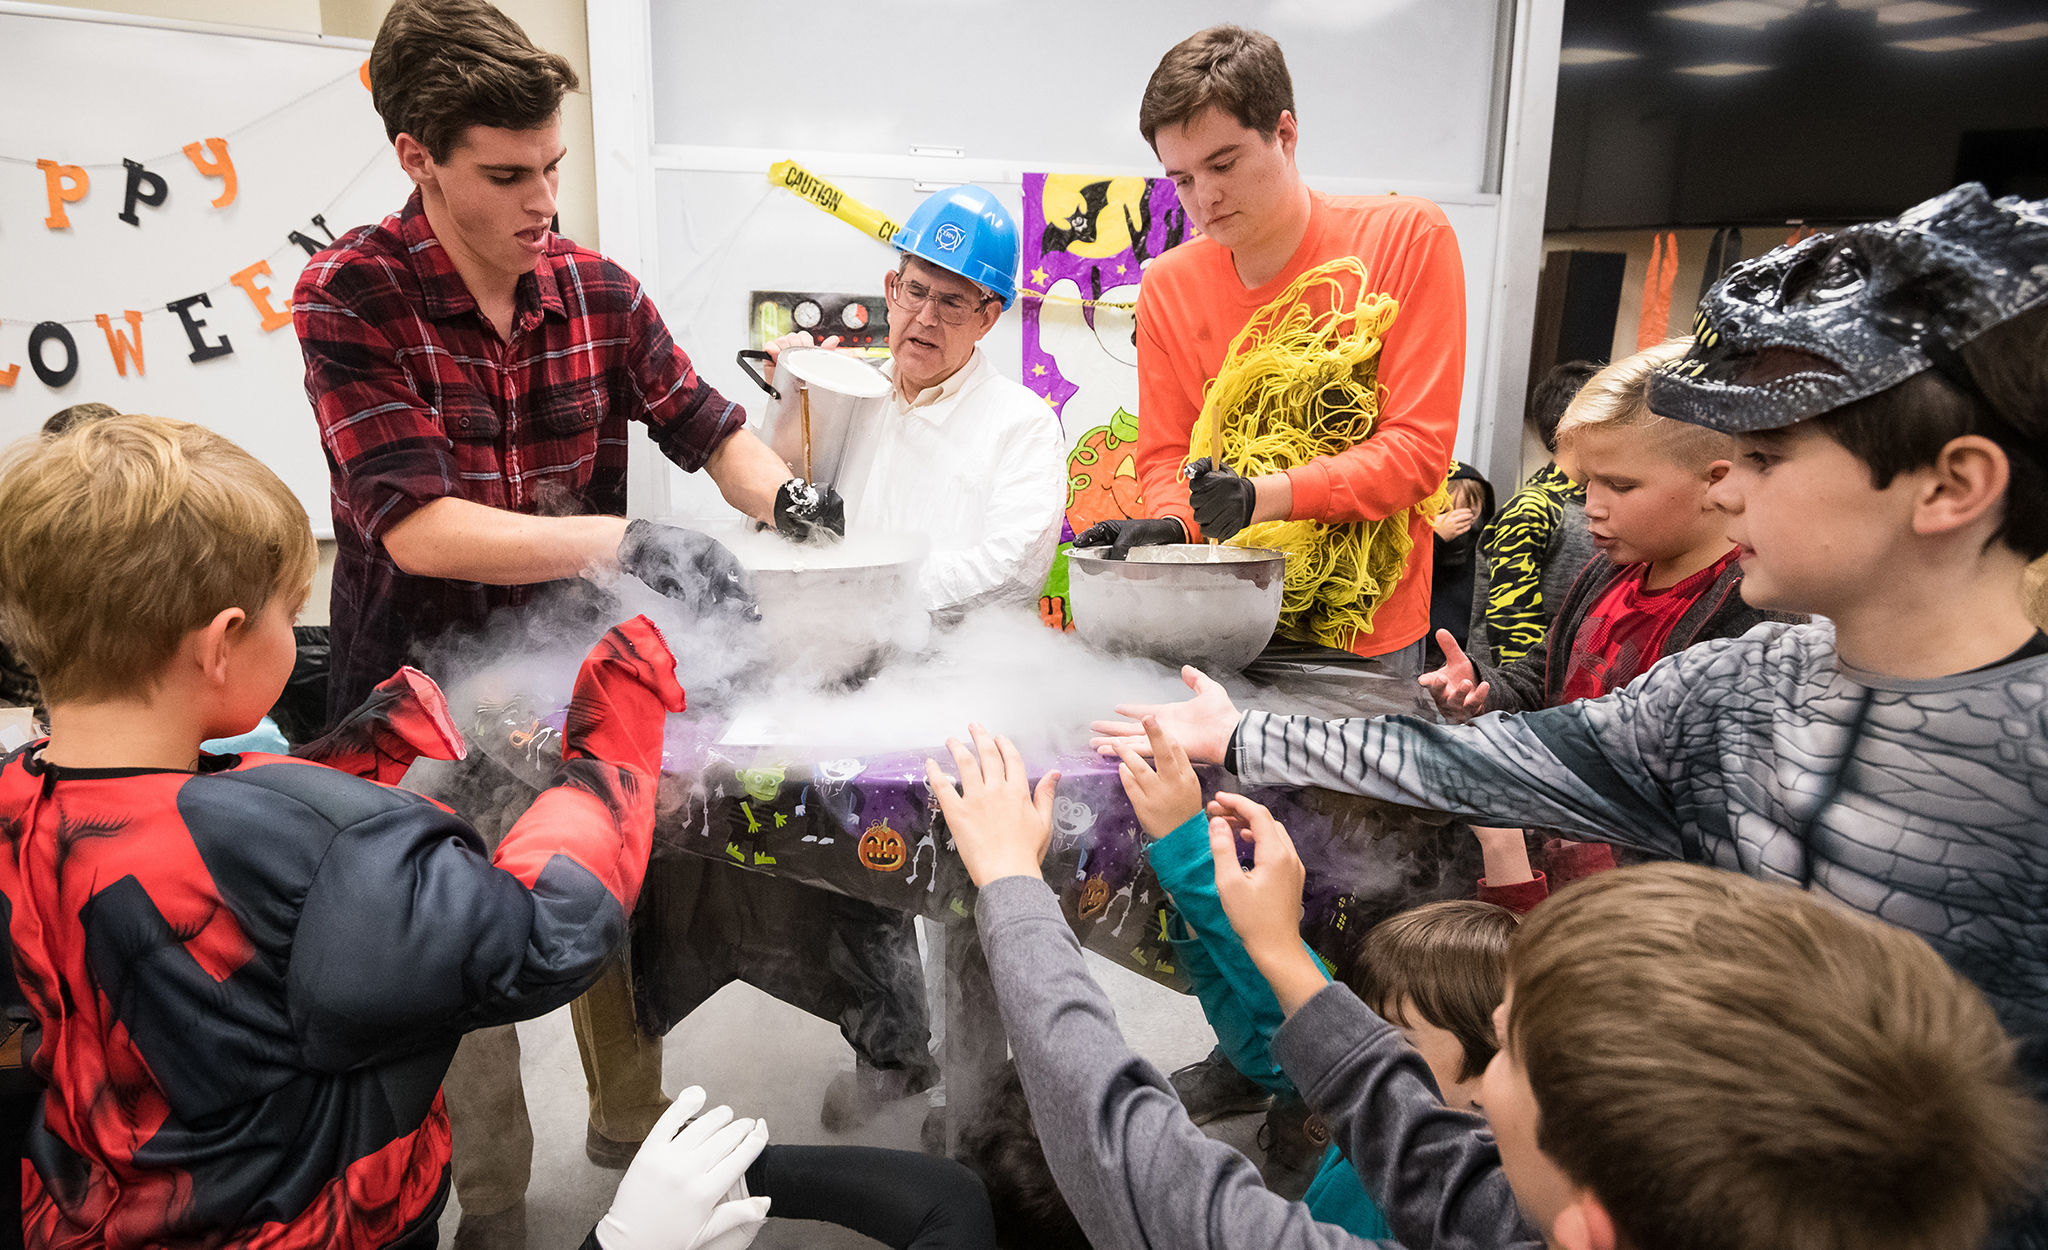 physics graduate students help prepare ice cream using liquid nitrogen as costumed customers await during Spooky Physics Night, hosted by the Department of Physics and Astronomy. Photo by Megan Wolfe/Ole Miss Digital Imaging Services